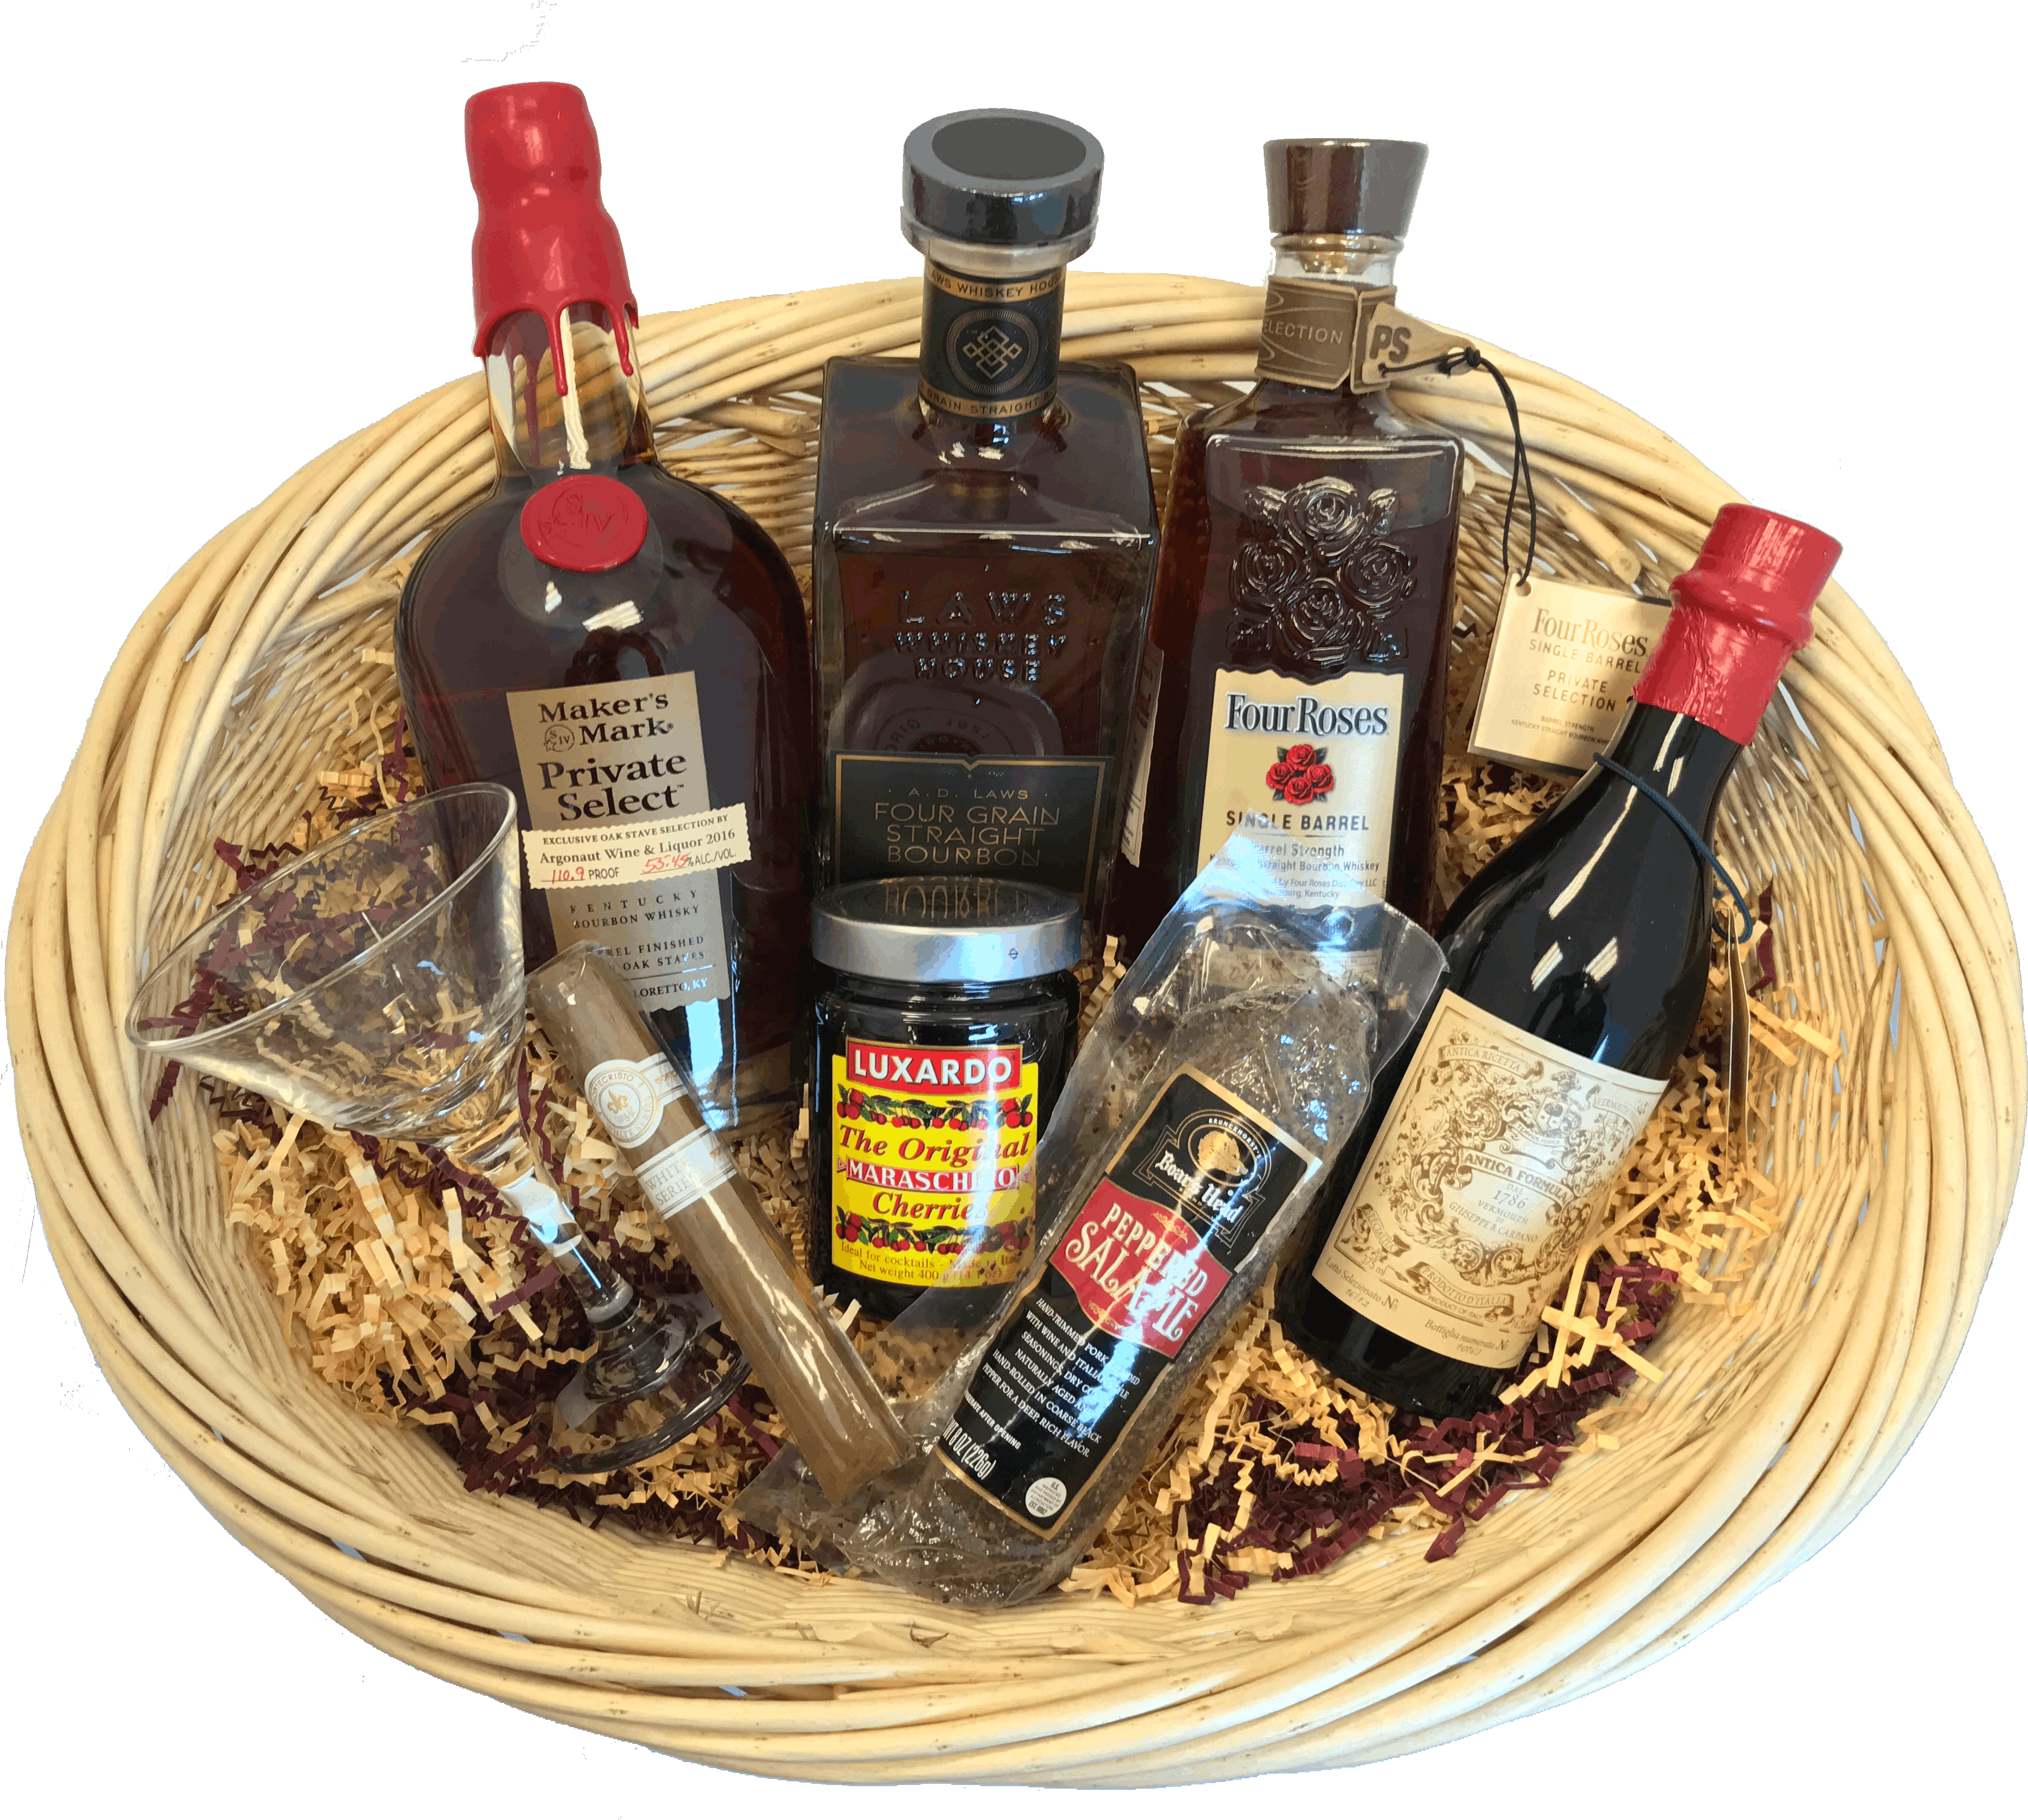 Needs To Orders Argonautliquor Com And Our Creative Staff Will Contact You Finalize Your Perfect Gift Please Allow A Minimum Of 24 Hours For